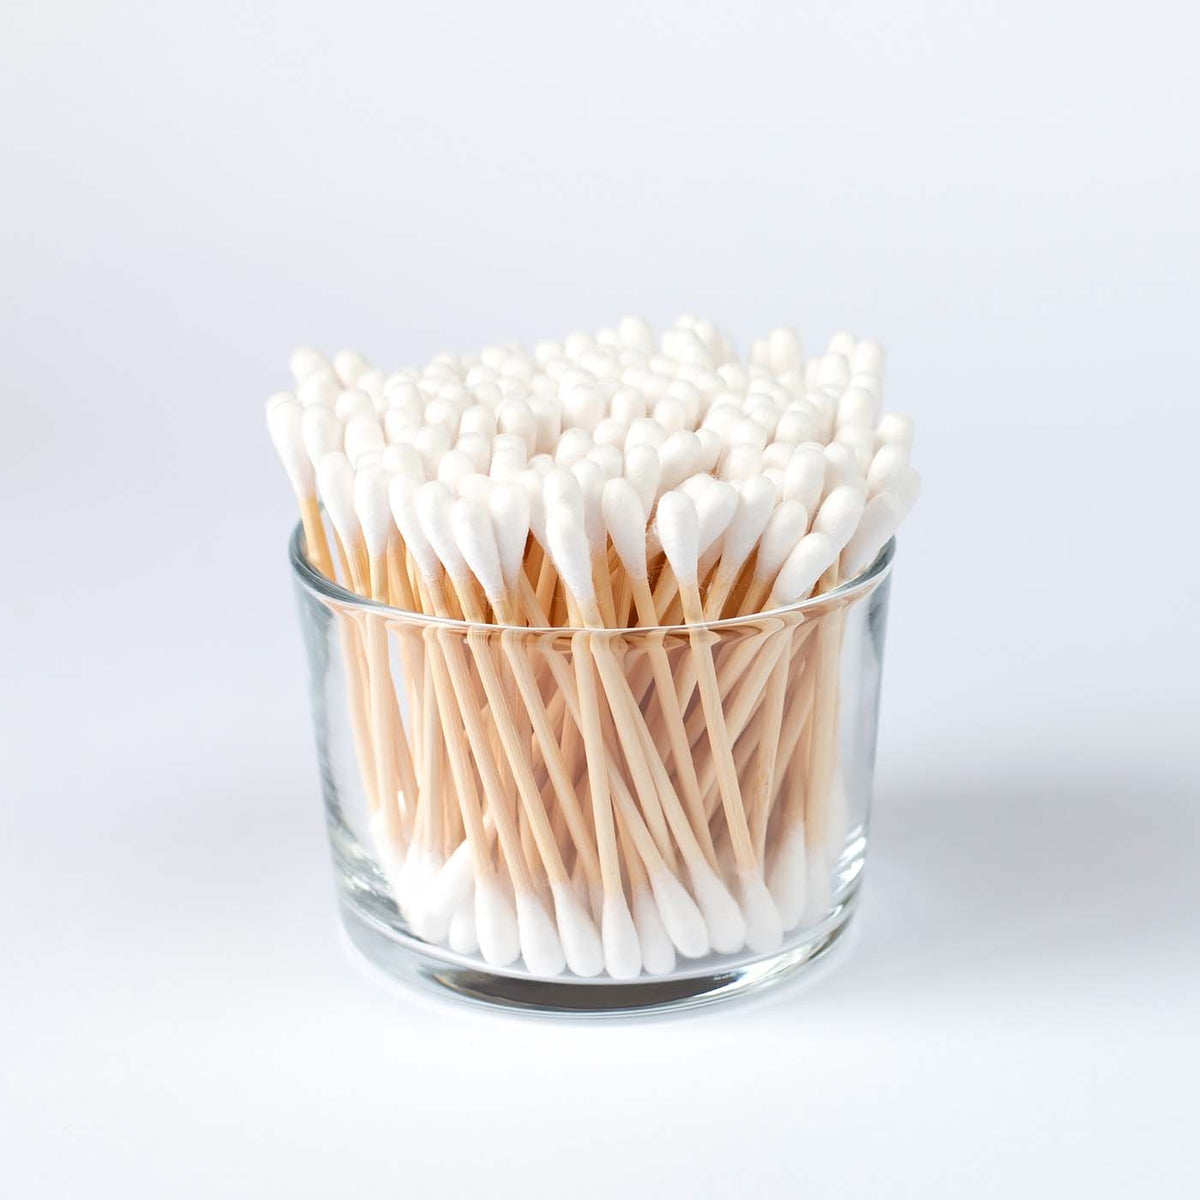 Bamboo Cotton Buds for Makeup by Jungle culture